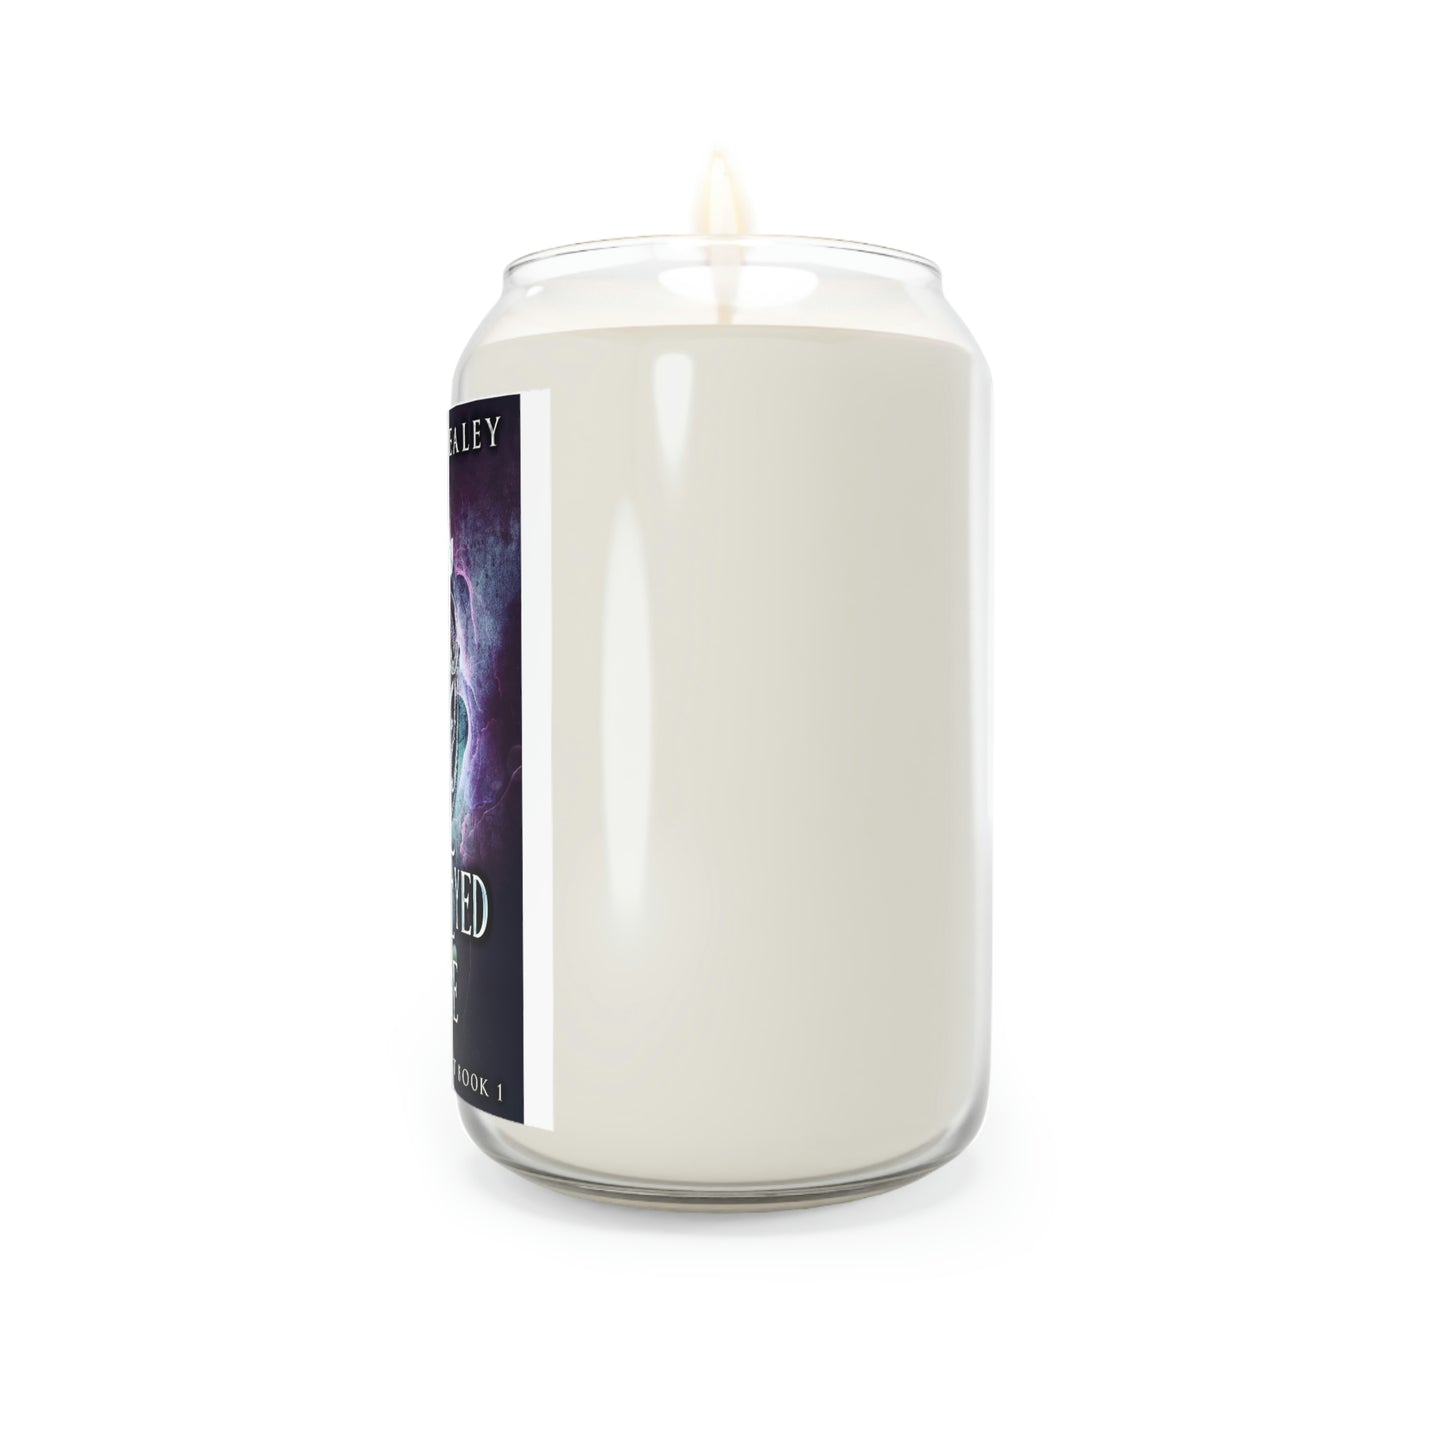 The Pale-Eyed Mage - Scented Candle